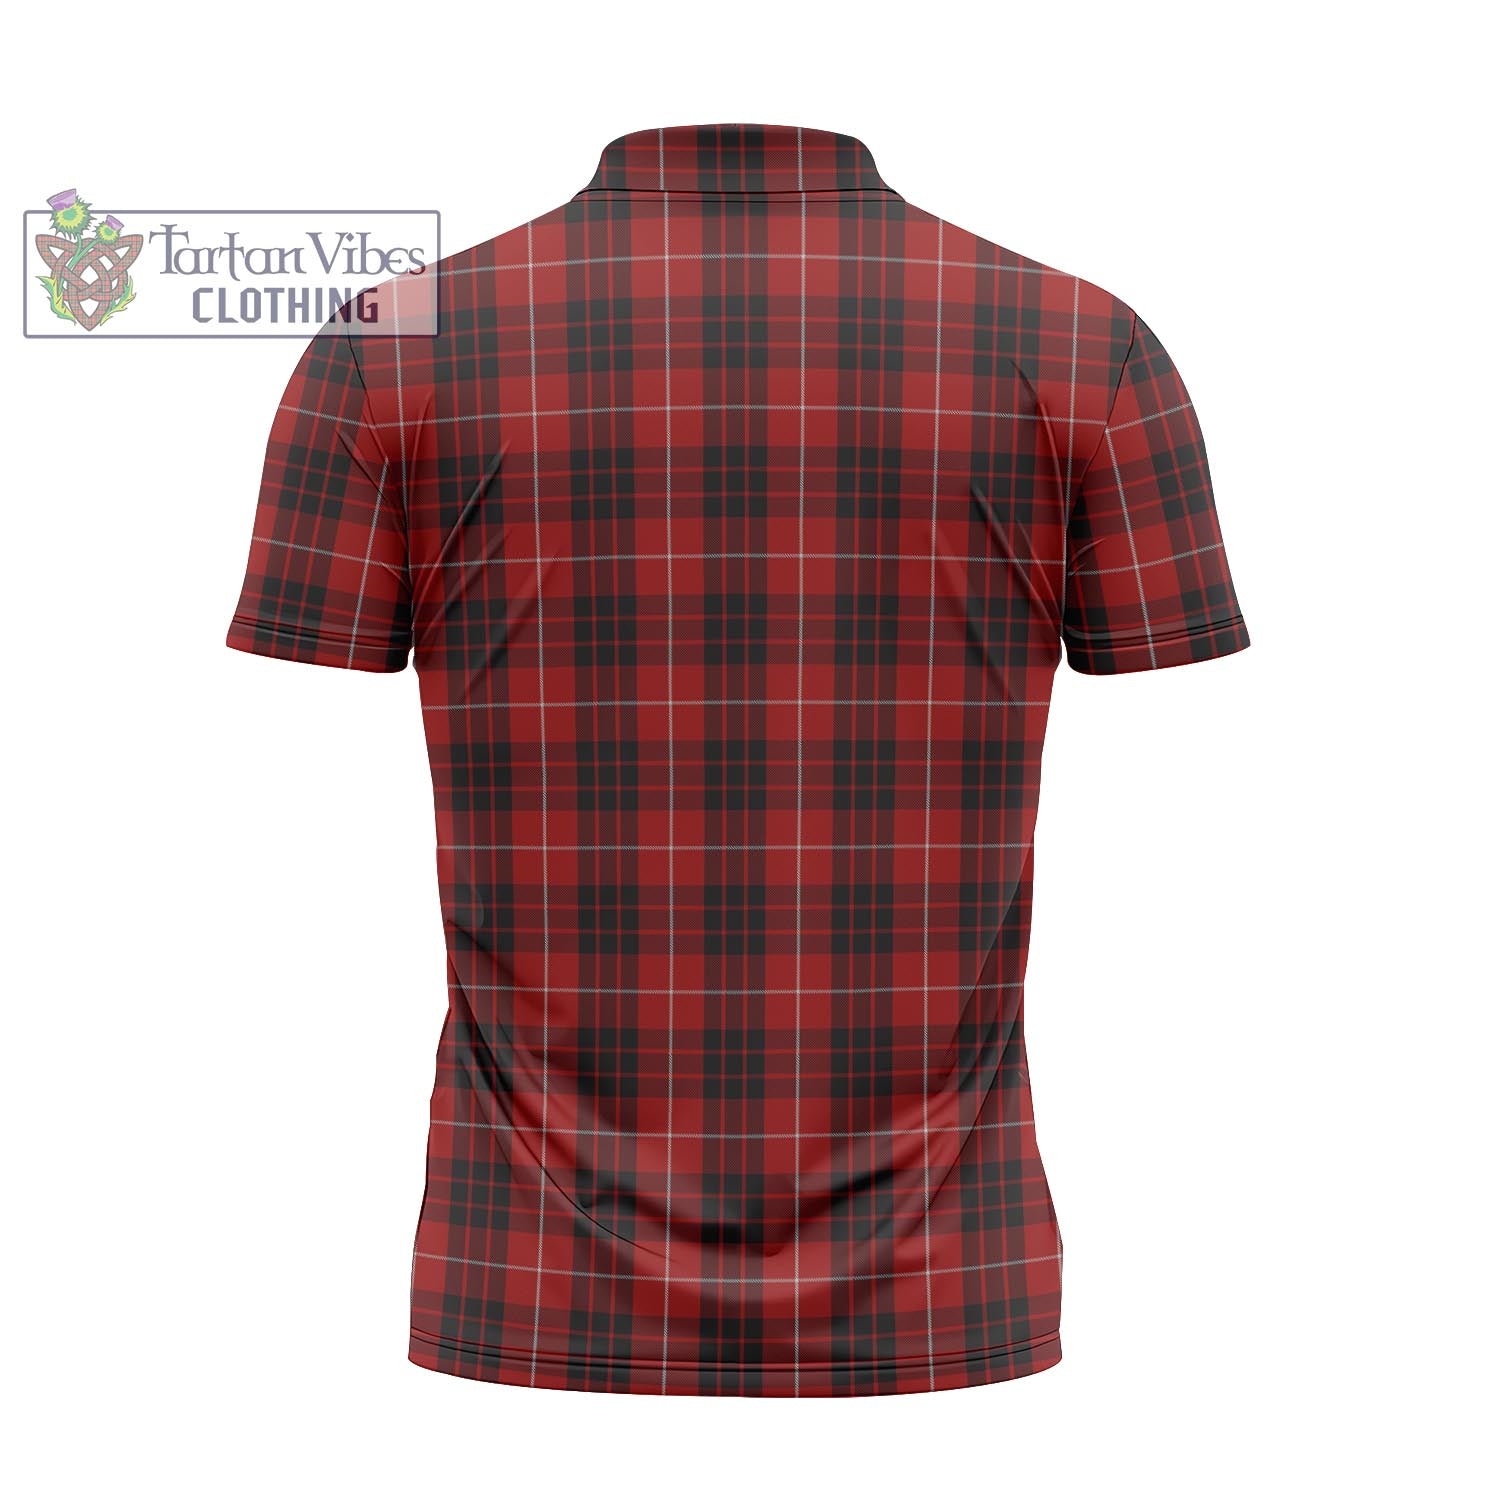 Tartan Vibes Clothing Munro Black and Red Tartan Zipper Polo Shirt with Family Crest